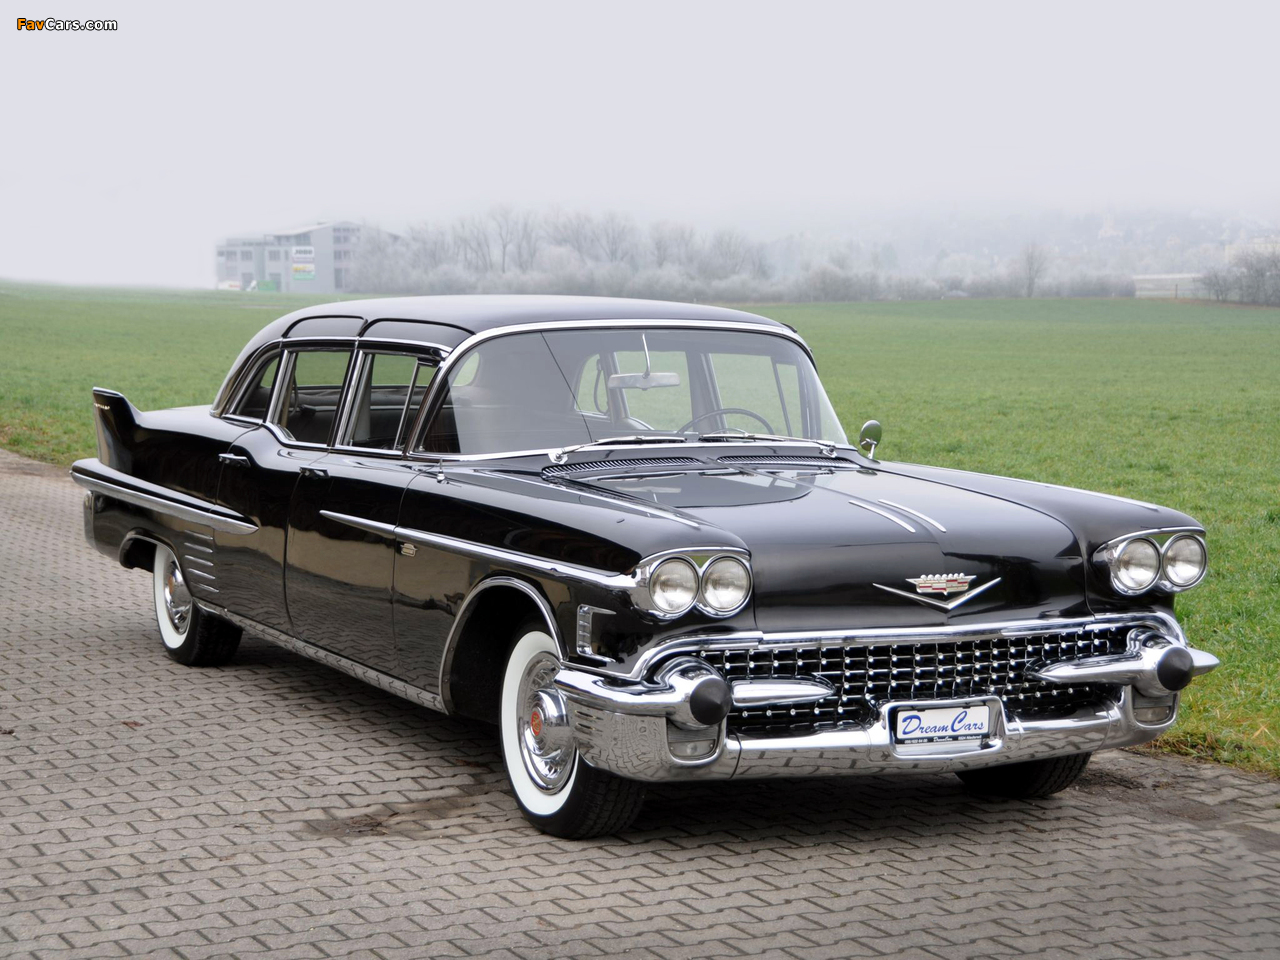 Pictures of Cadillac Fleetwood Seventy-Five Limousine 1958 (1280 x 960)